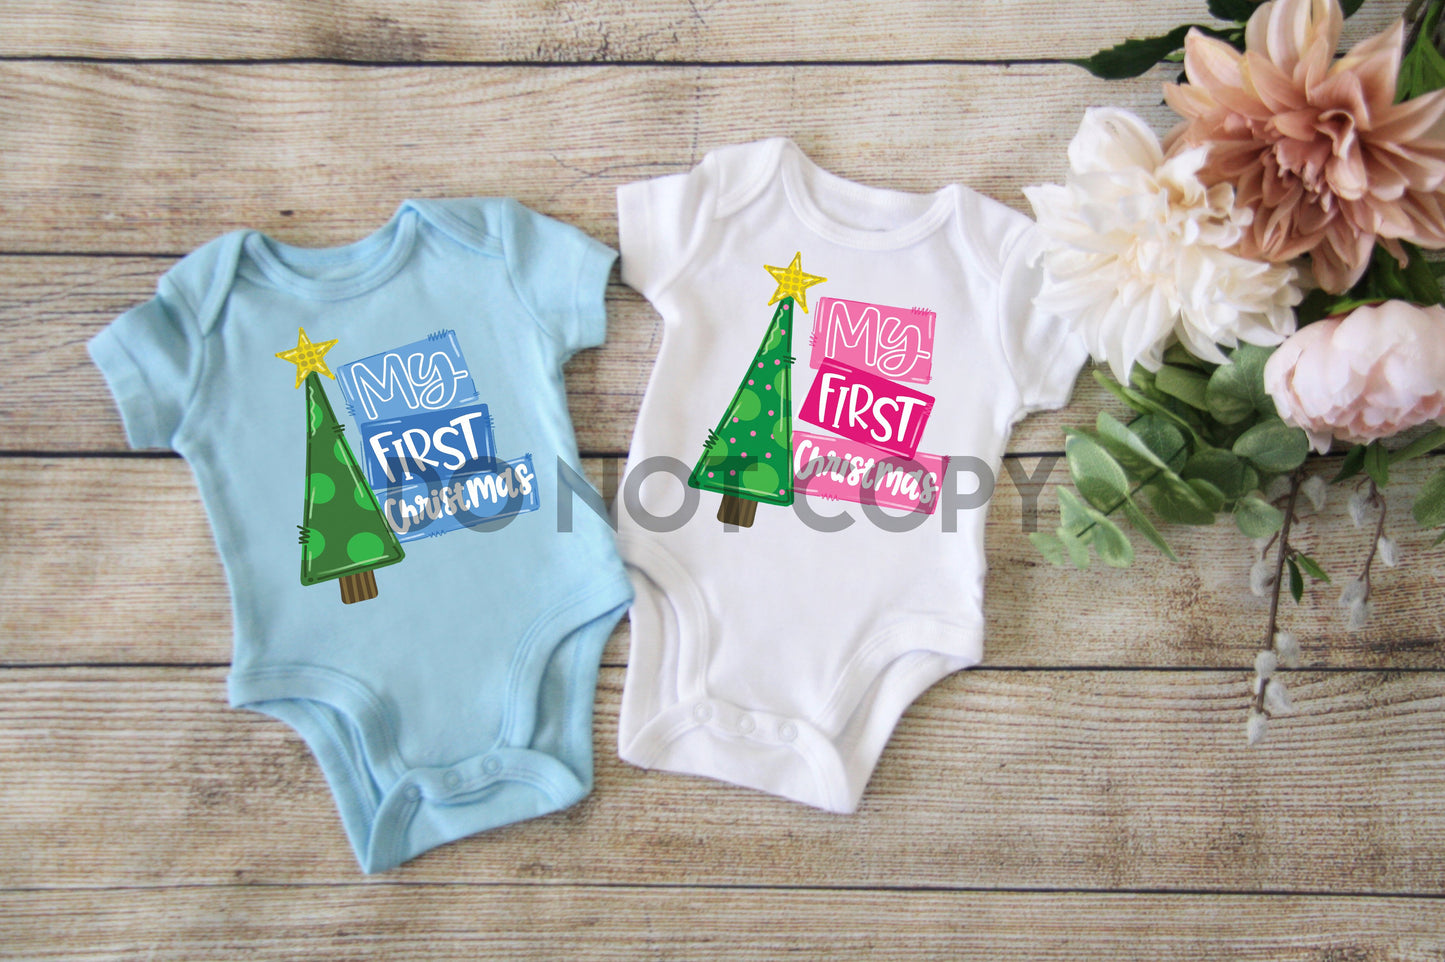 My first christmas boys or girls infant HIGH HEAT Full color Screen Print transfer